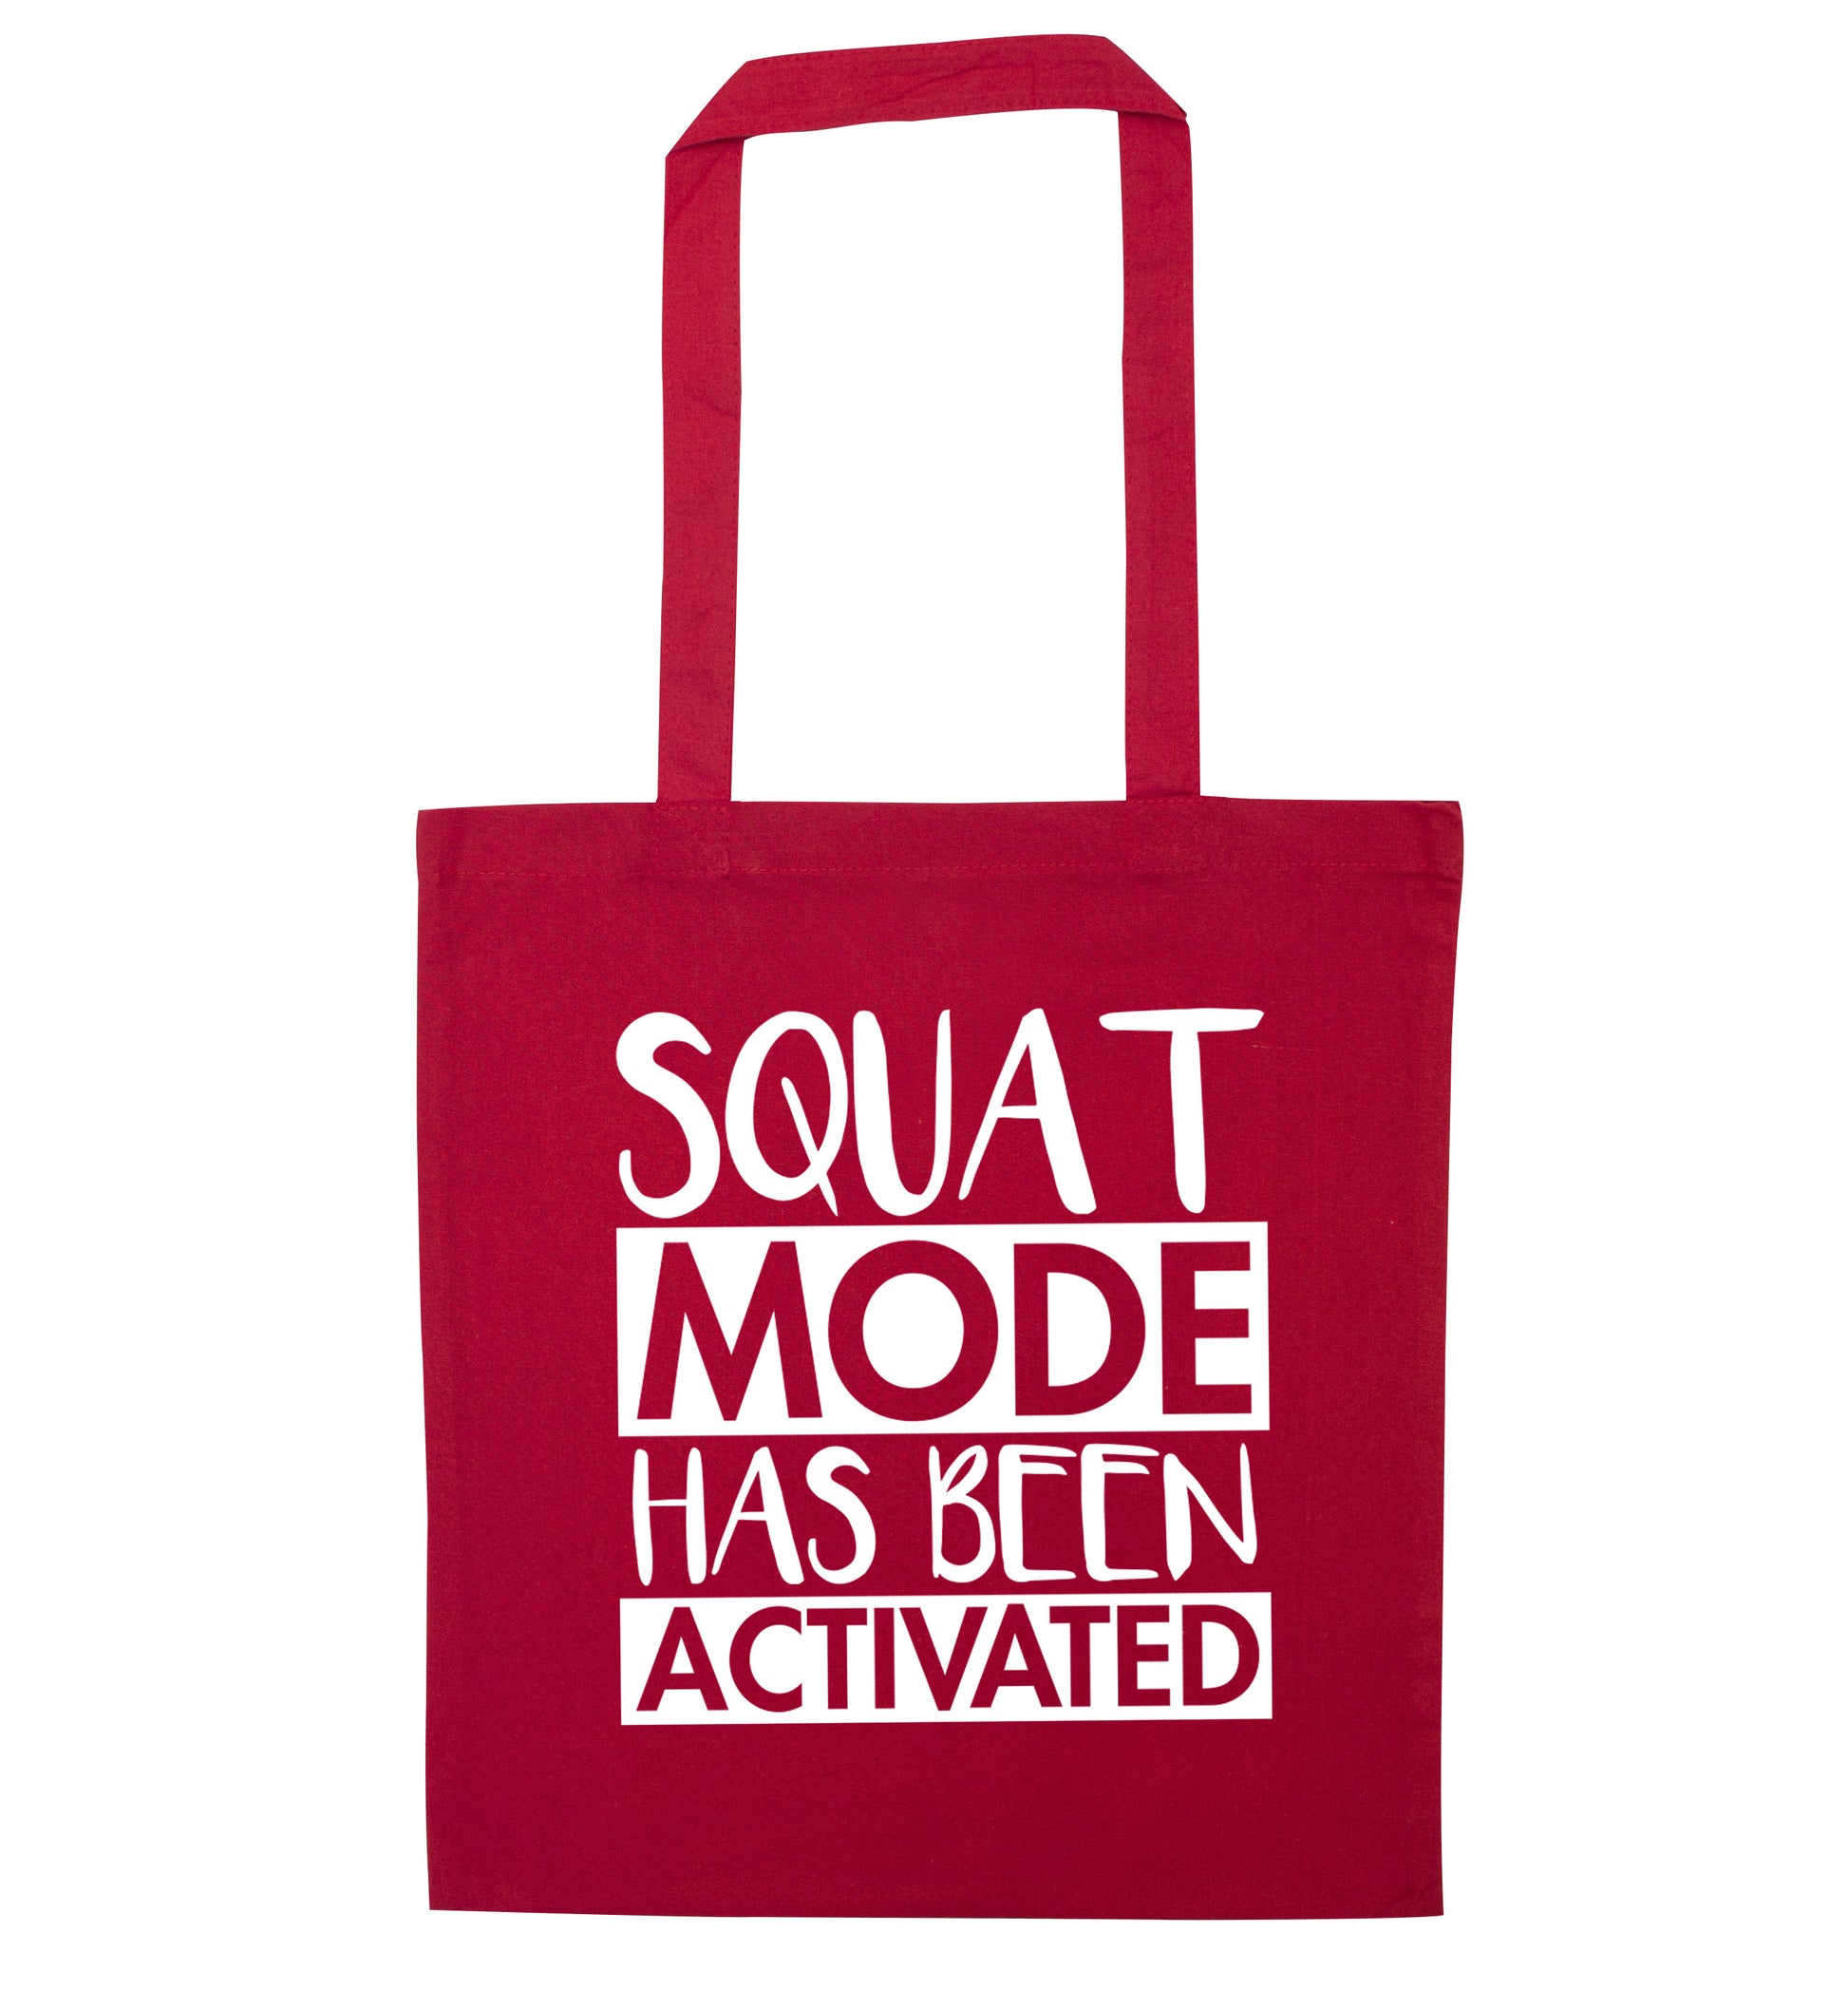 Squat mode activated red tote bag